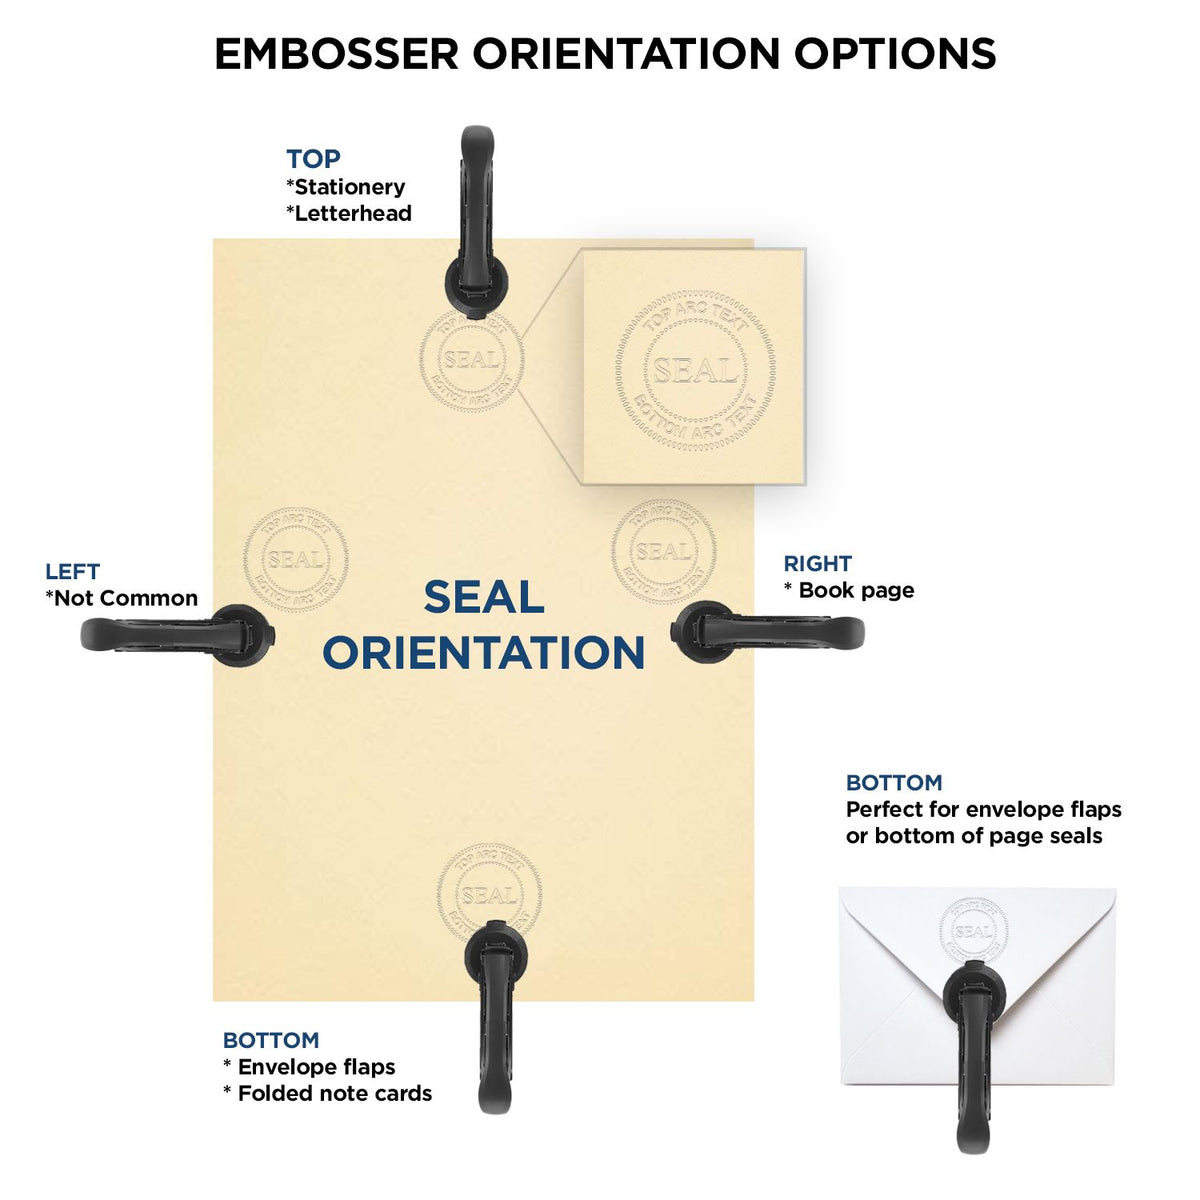 An infographic for the Extended Long Reach Kansas Surveyor Embosser showing embosser orientation, this is showing examples of a top, bottom, right and left insert.